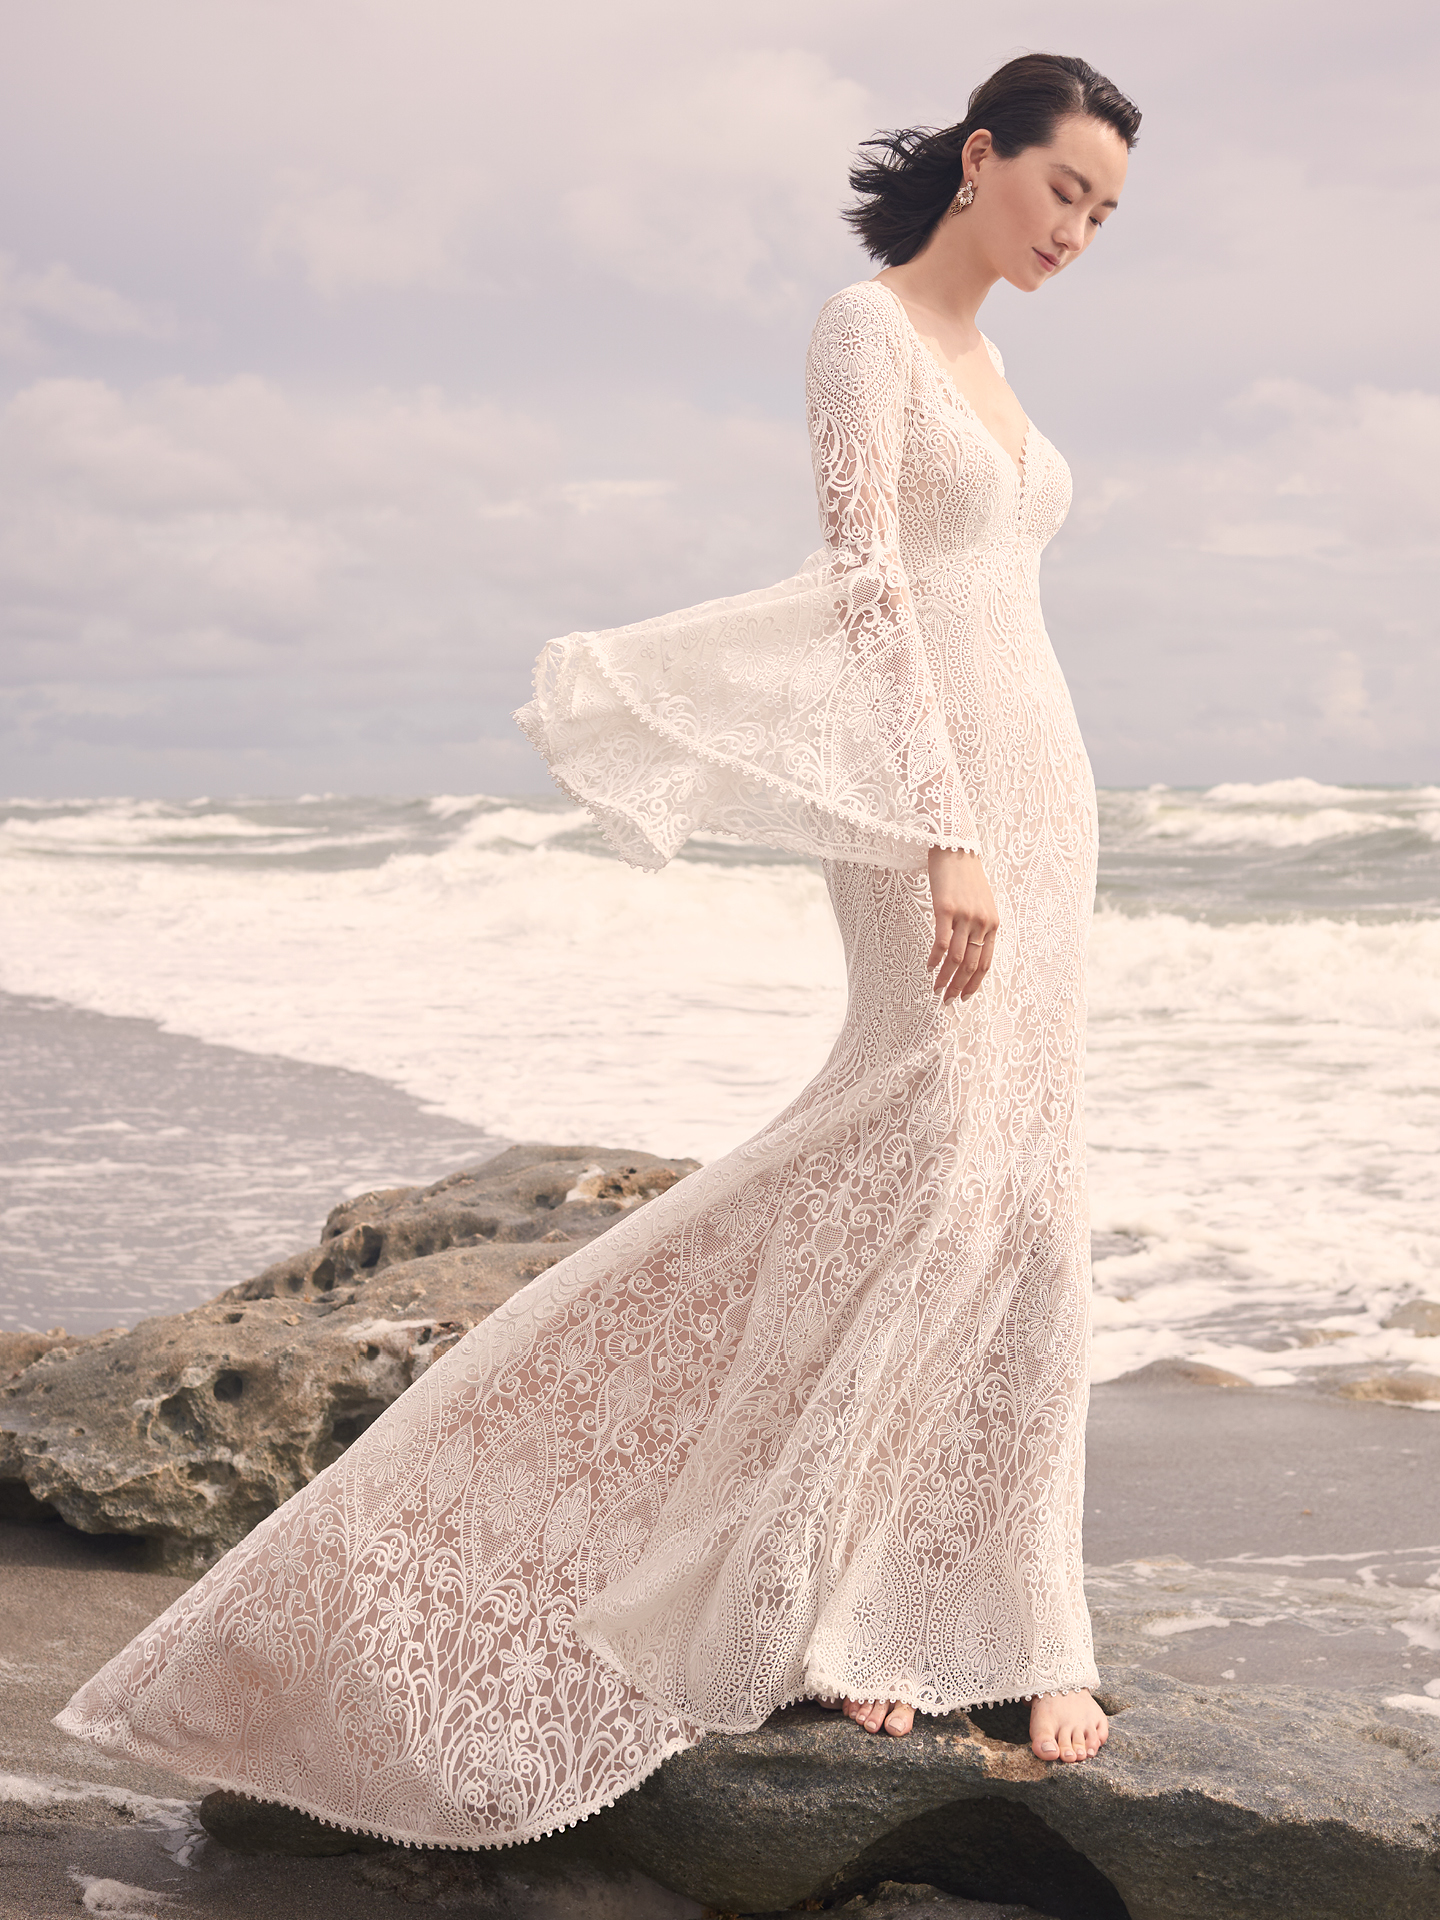 Model Wearing Vintage Lace Wedding Dress with Bell Sleeves Called Benson by Sottero and Midgley